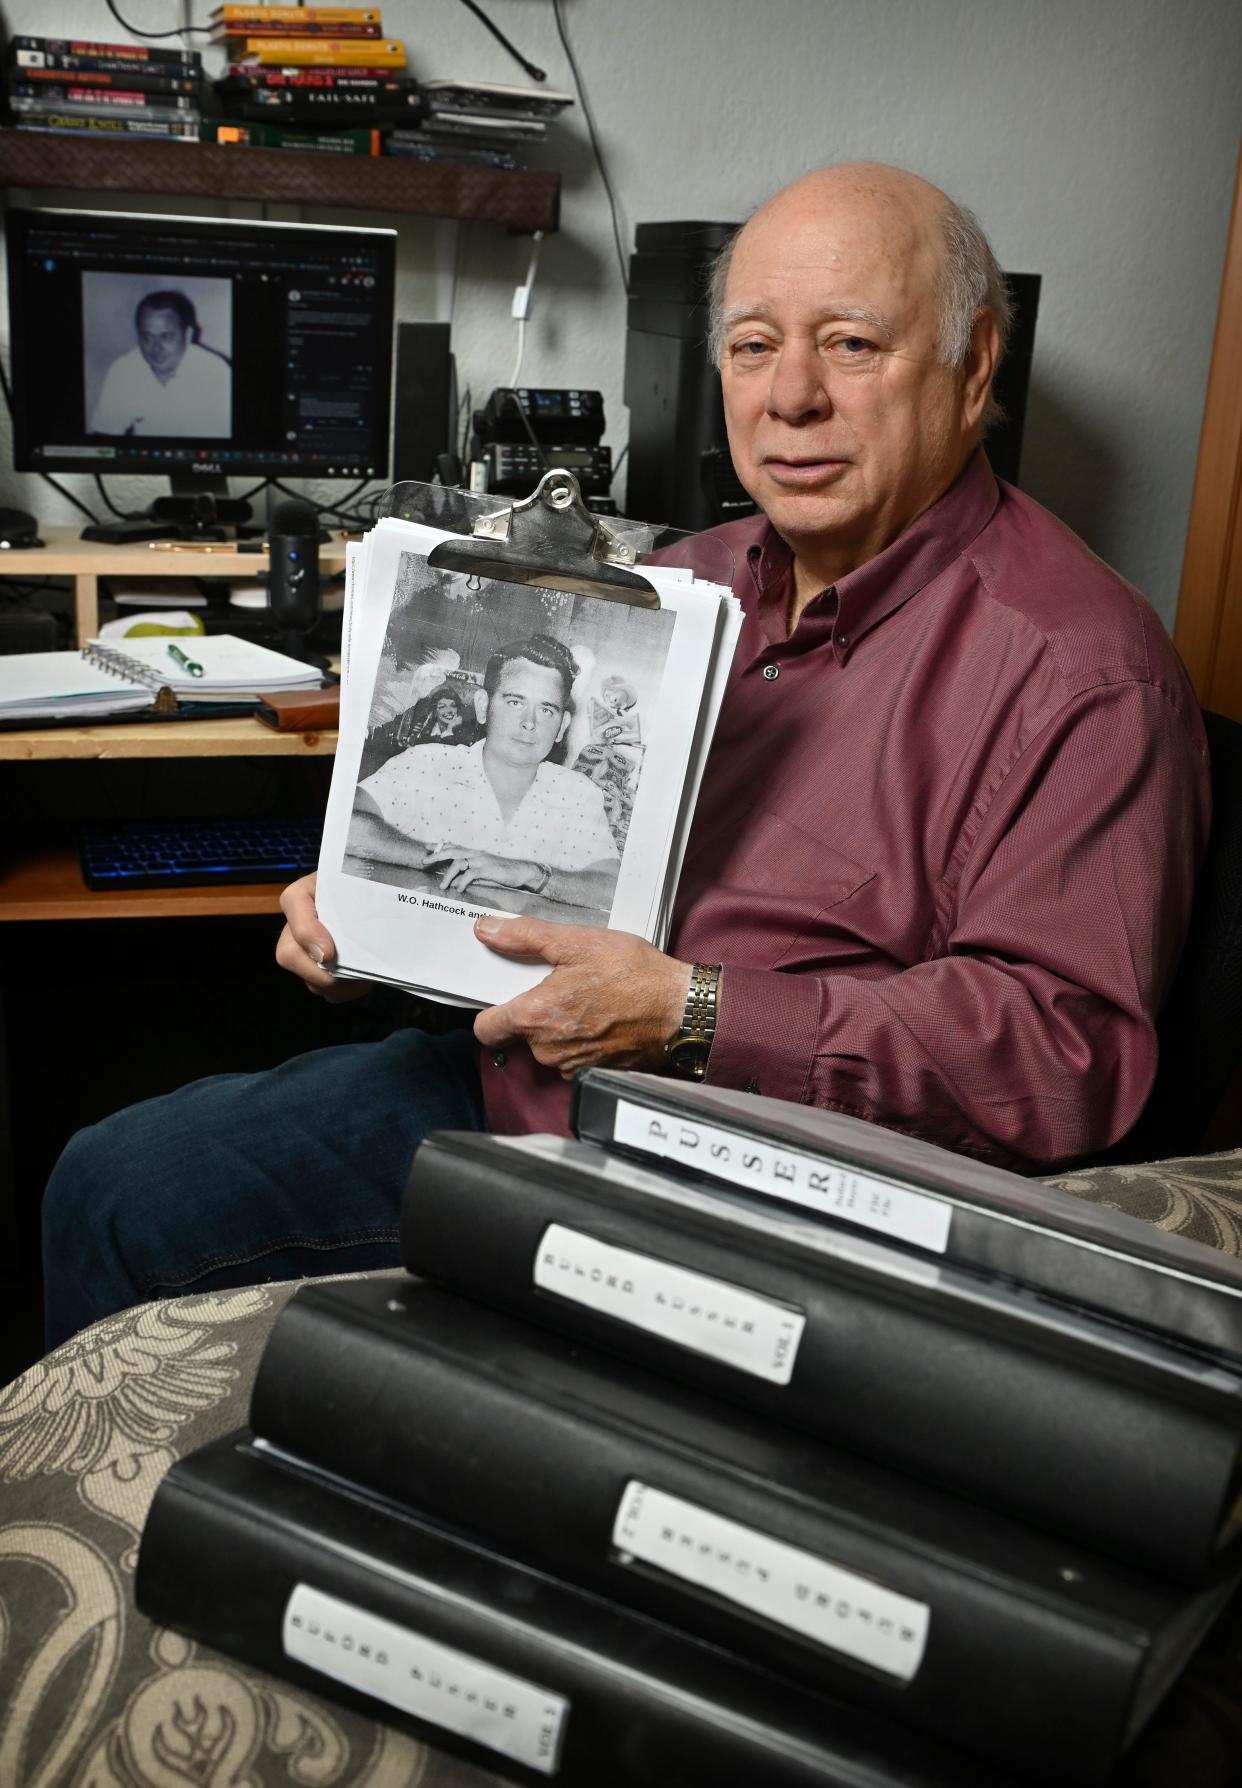 Mike Elam, a retired sheriff from Bella Vista, Arkansas, shows a picture of W.O. (William Odel) Hathcock, owner of The Plantation Club – part of the research he accumulated for his self-published book about investigating the legend of Buford Pusser – at his home. Elam says he has provided tips to the Tennessee Bureau of Investigations, which recently exhumed the body of Pusser's wife.